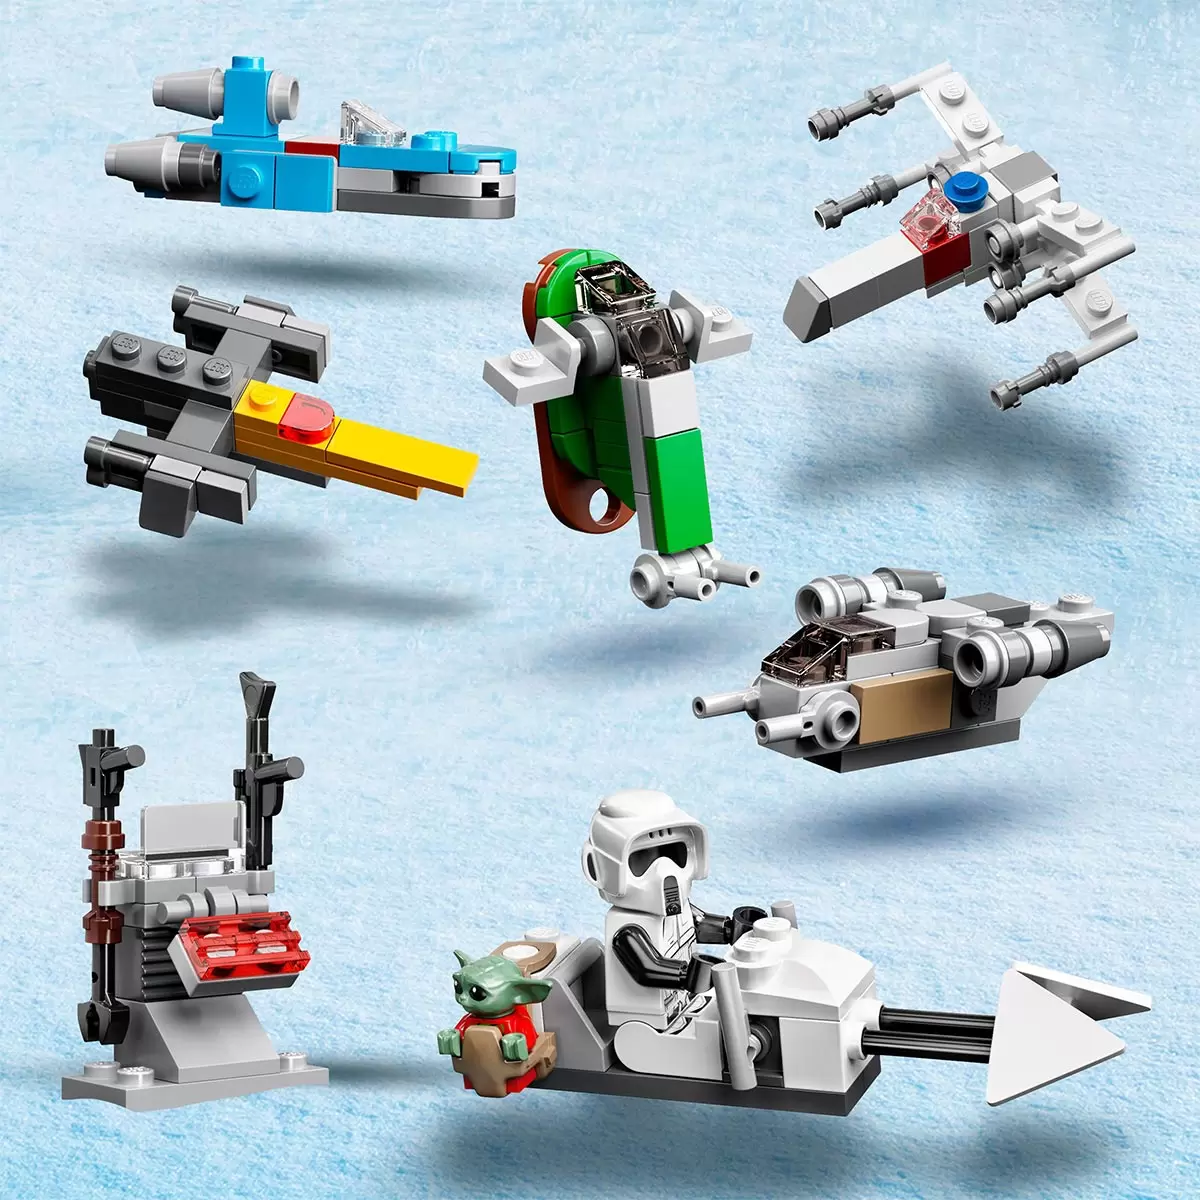 Buy LEGO Star Wars Advent Calendar Features2 Image at Costco.co.uk